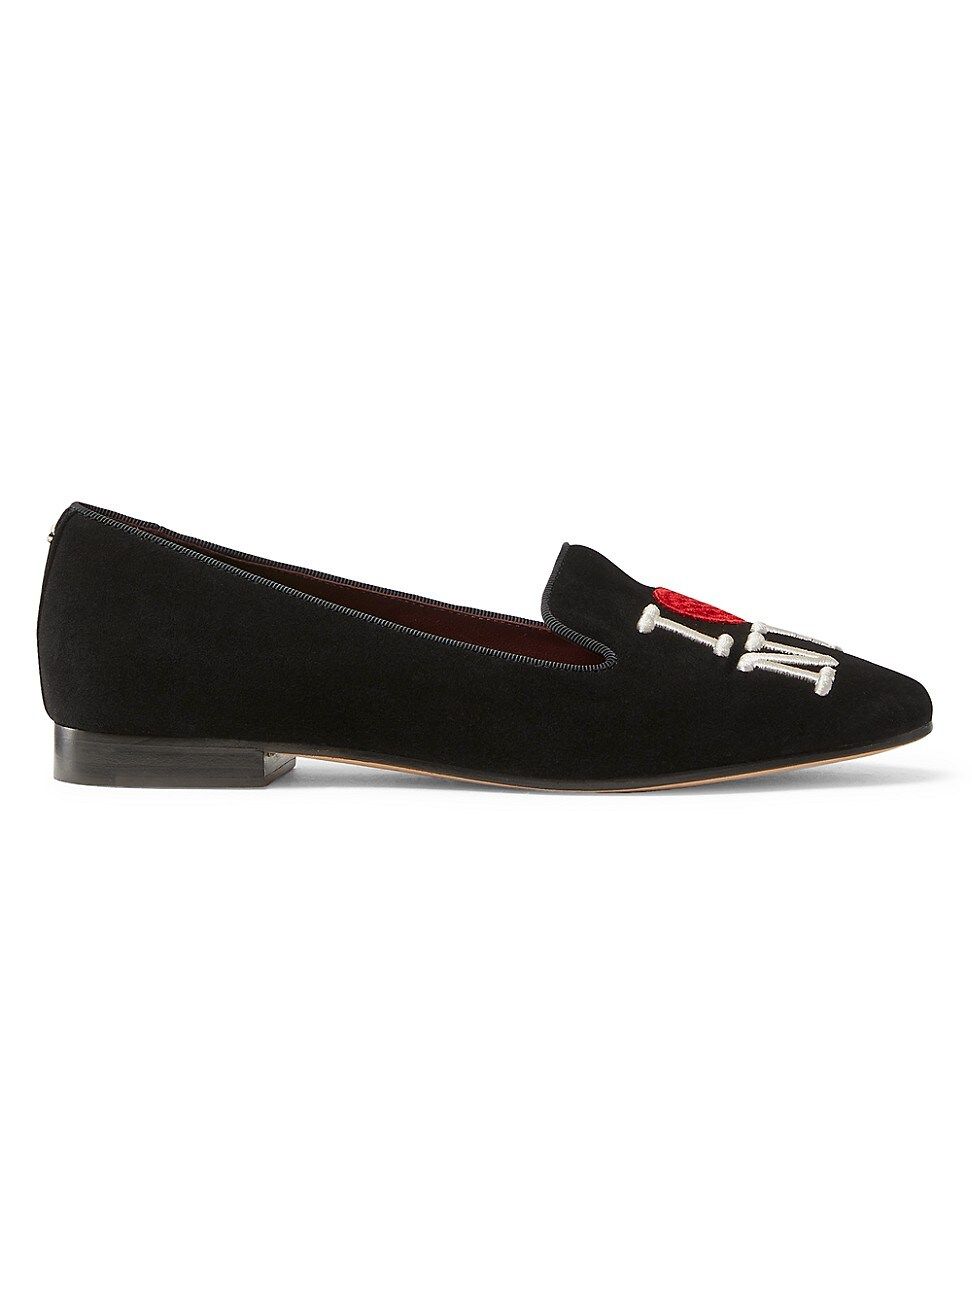 Lounge New York Suede Flats | Saks Fifth Avenue